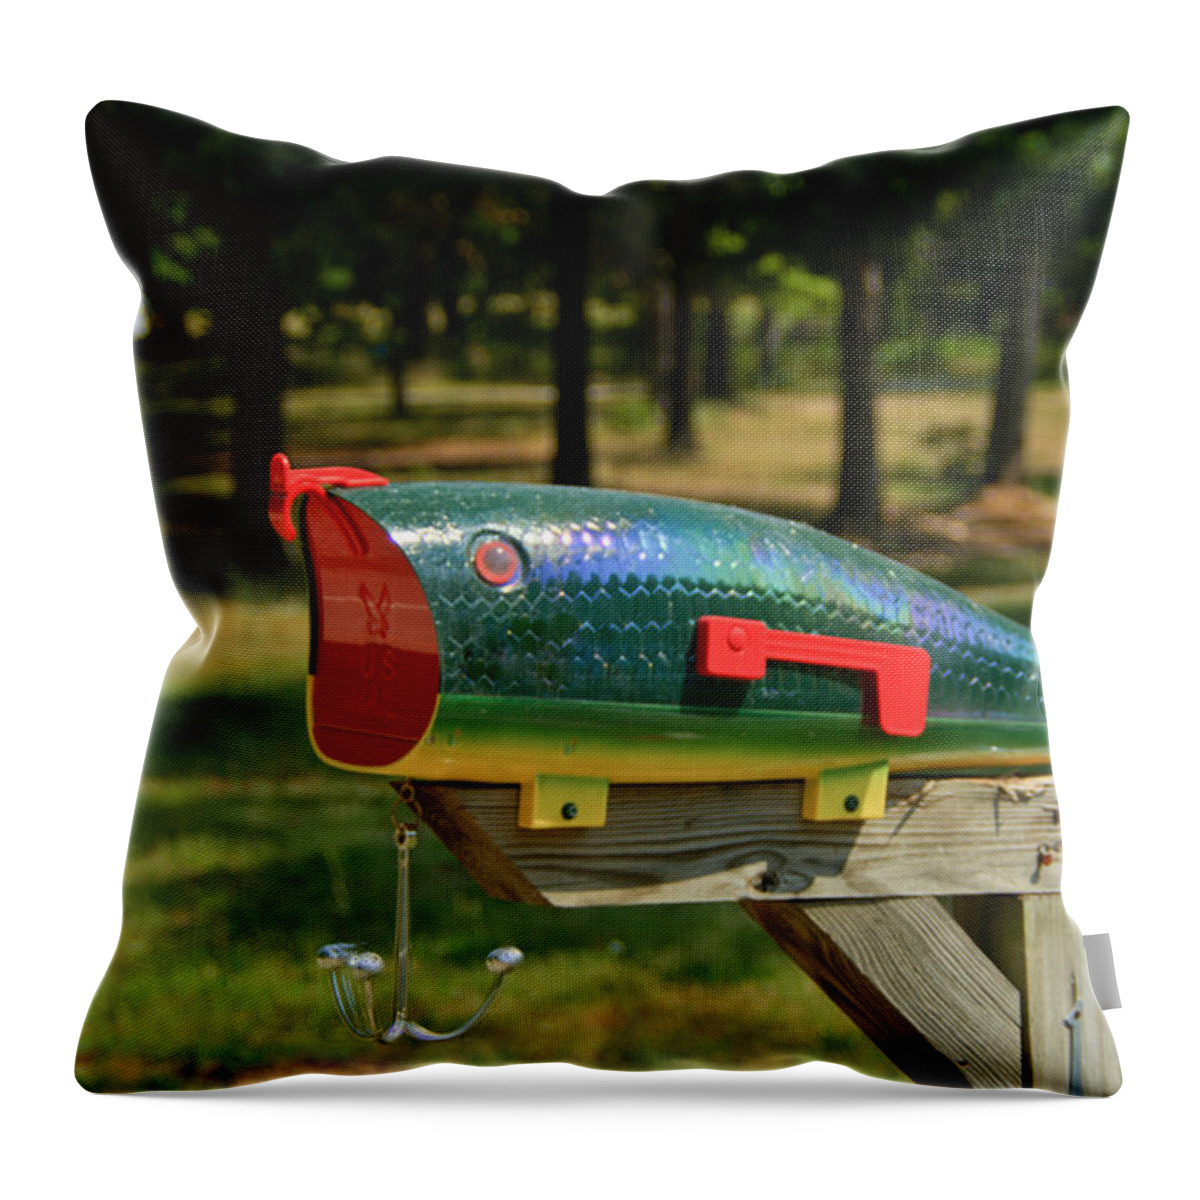 Fishing Throw Pillow featuring the photograph Fishing Lure Mailbox 2 by Douglas Barnett